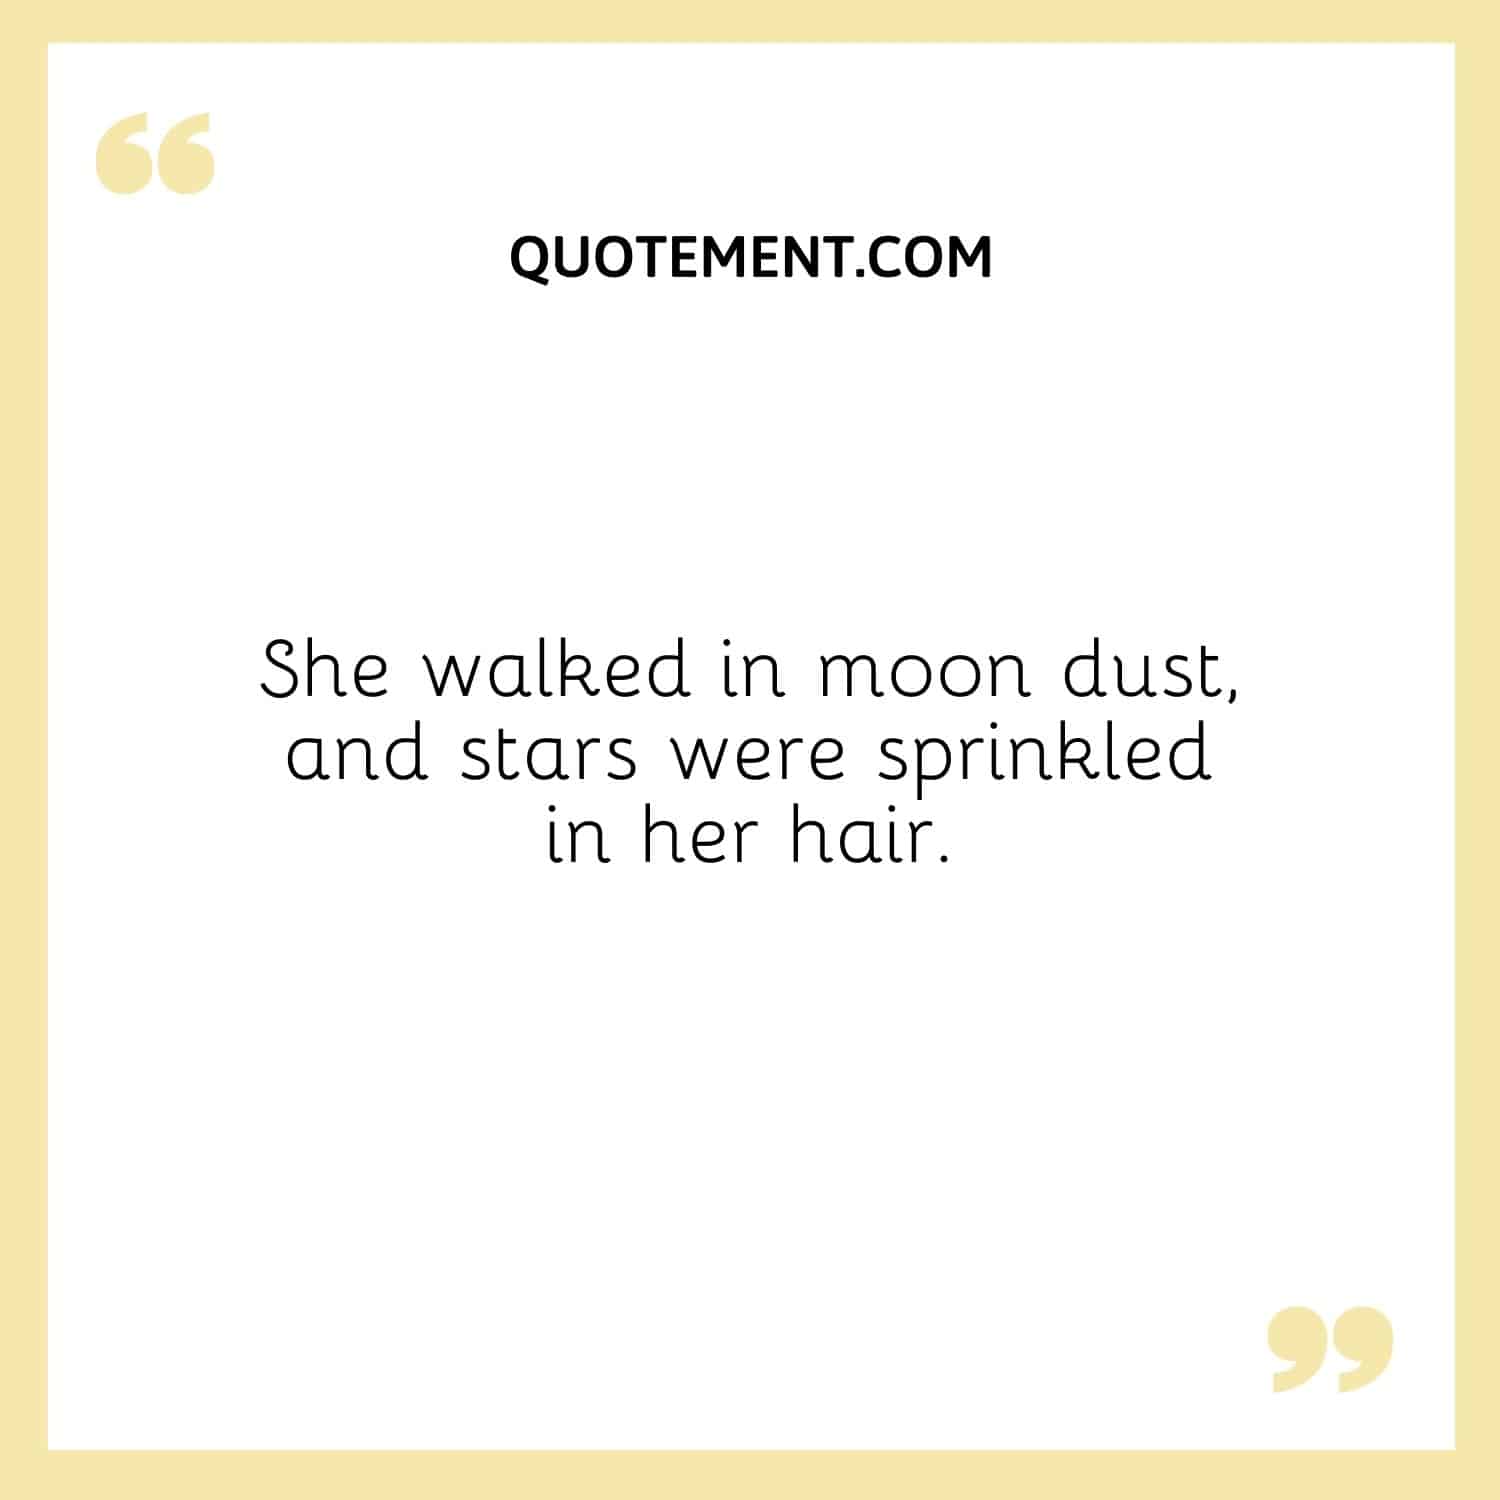 She walked in moon dust, and stars were sprinkled in her hair.